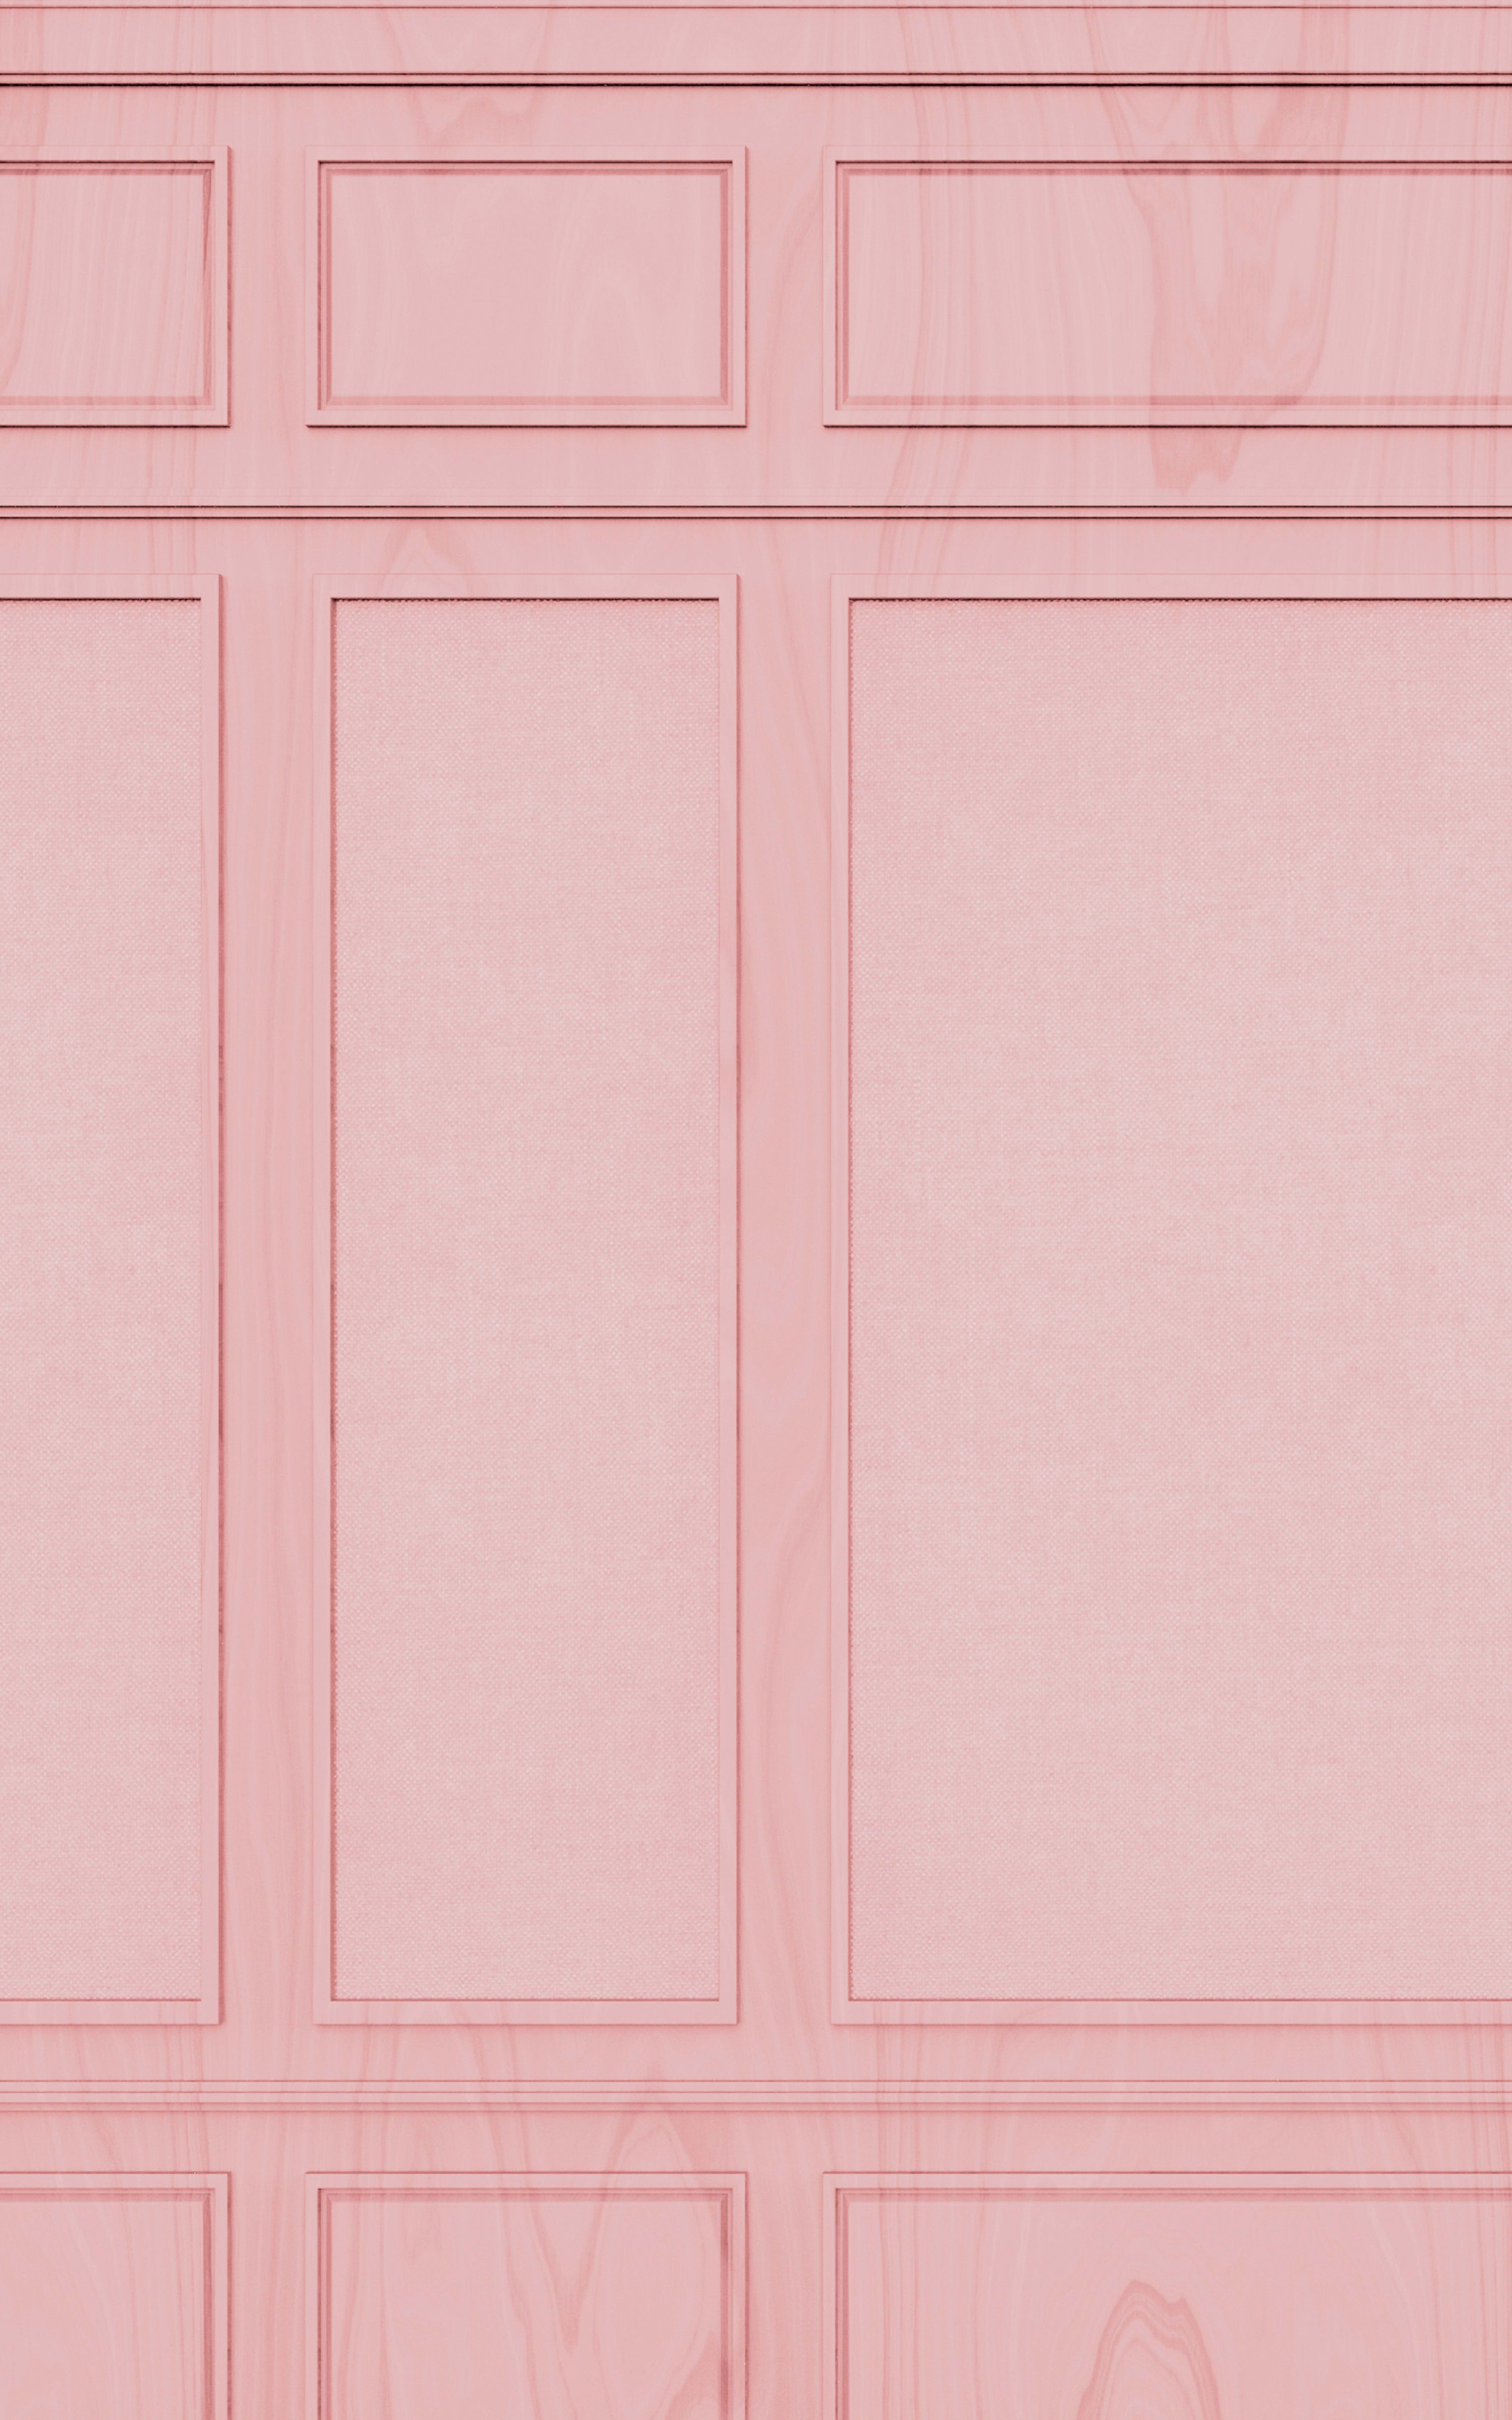 MuralsWallpaper Just Launched A Wes Anderson Inspired Collection. Wes Anderson Decor, Wes Anderson Wallpaper, Wes Anderson